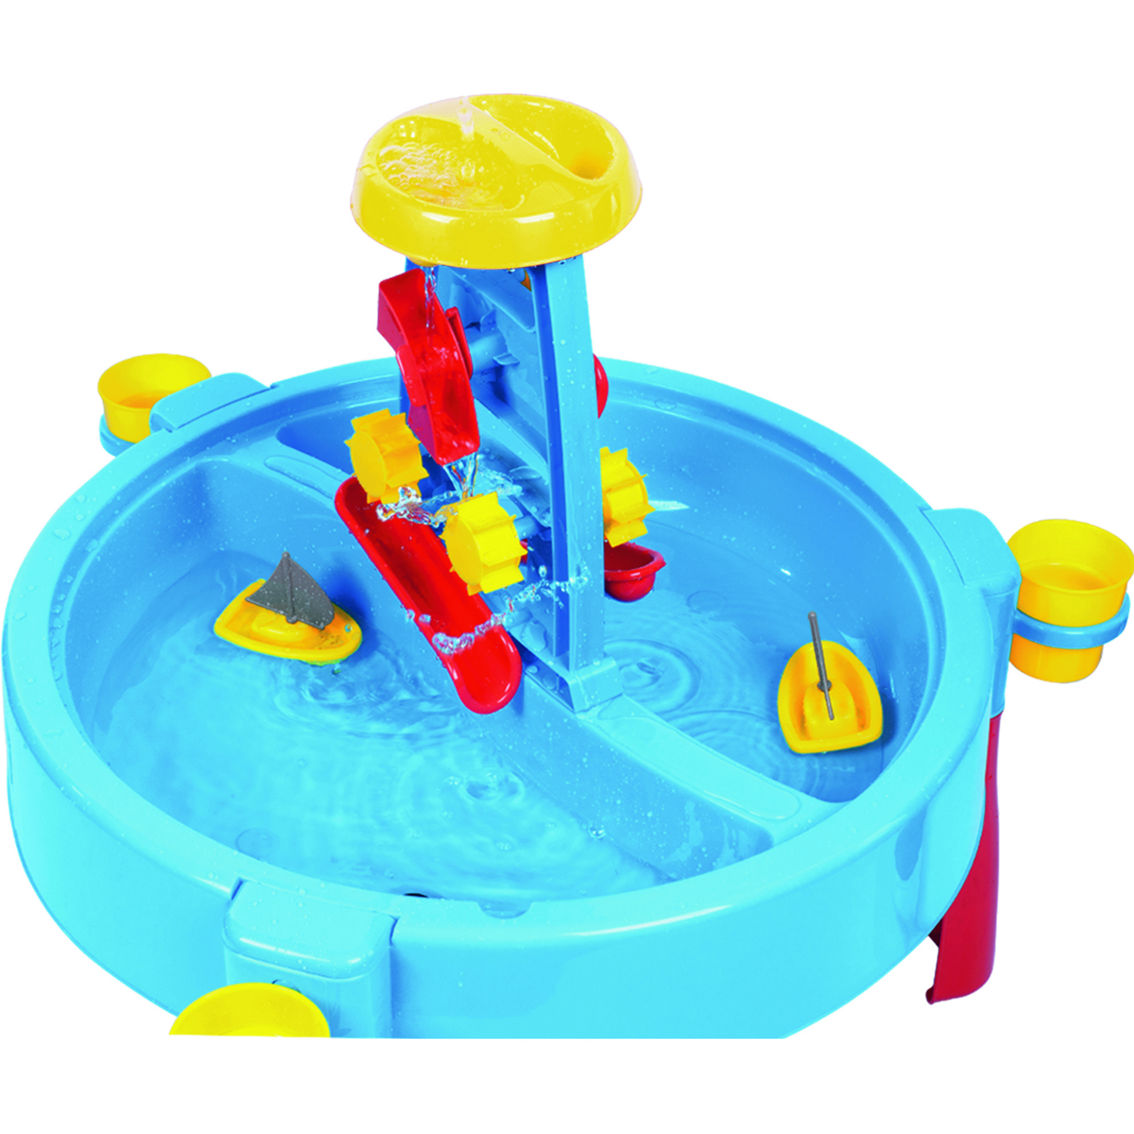 Dolu Toys 3-in-1 Ultimate Water and Sand Activity Table - Image 5 of 5